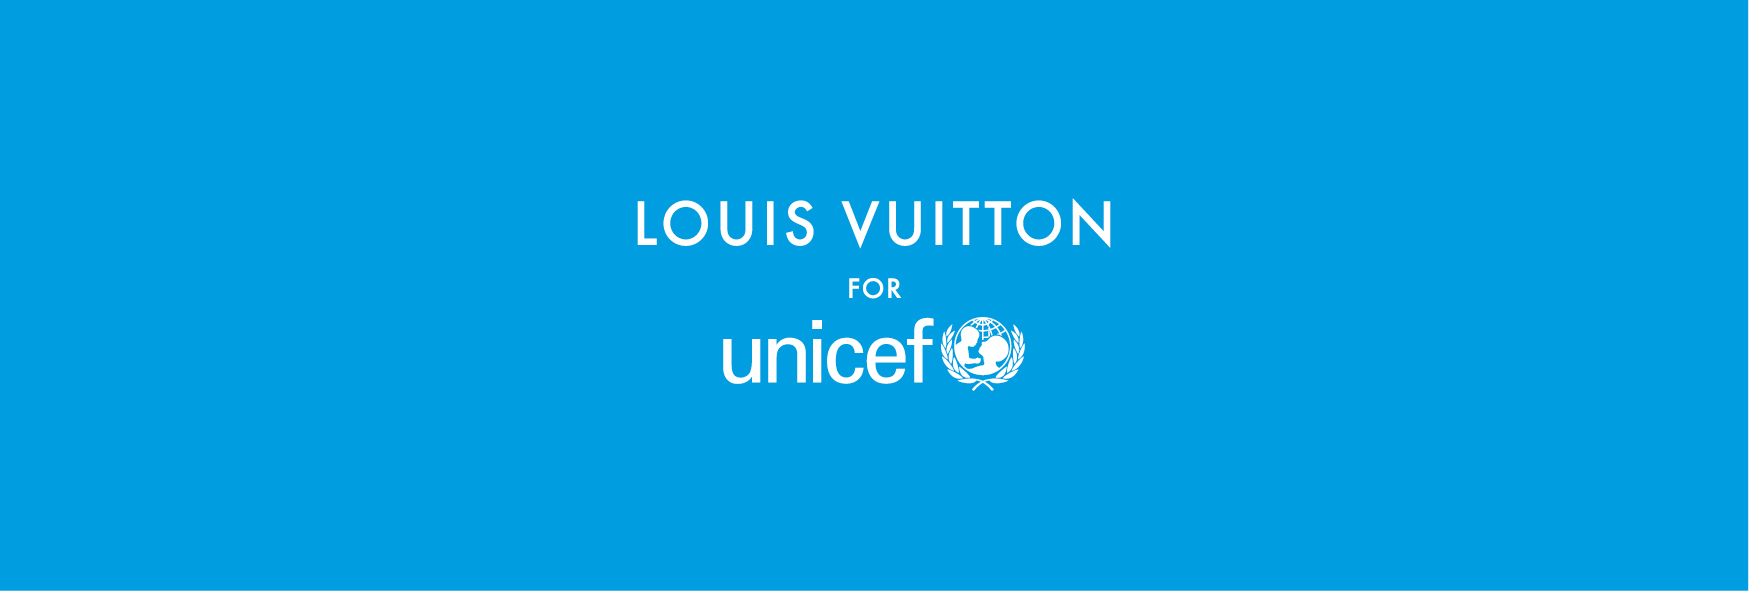 Louis Vuitton for UNICEF - LV for UNICEF 2018